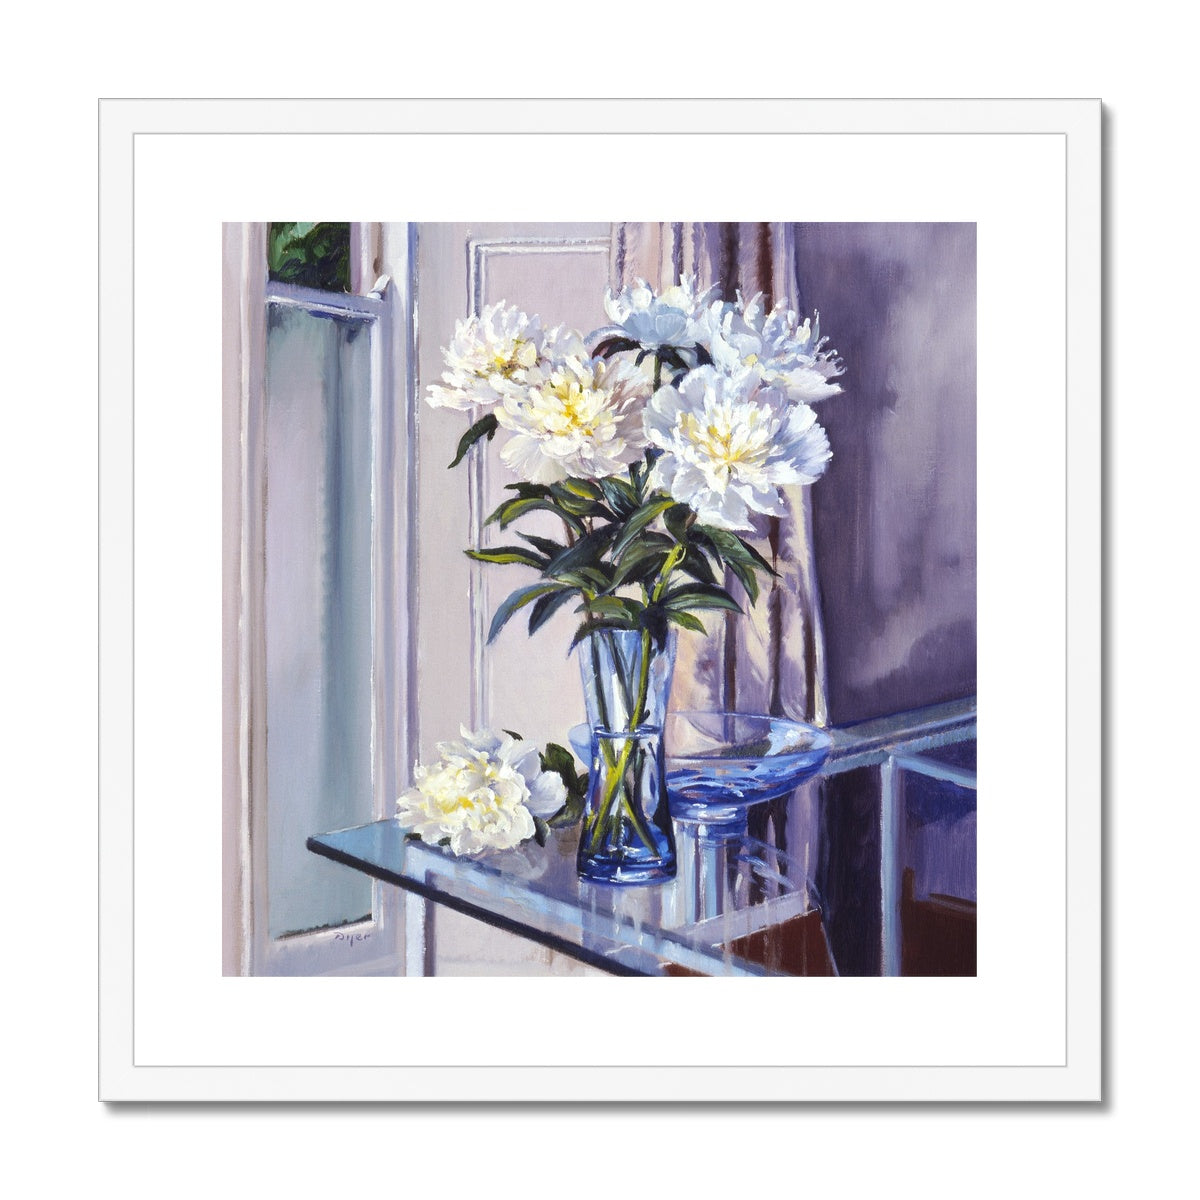 Ted Dyer Framed Open Edition Cornish Fine Art Print. 'White Peonies in a Blue Vase'. Cornwall Art Gallery